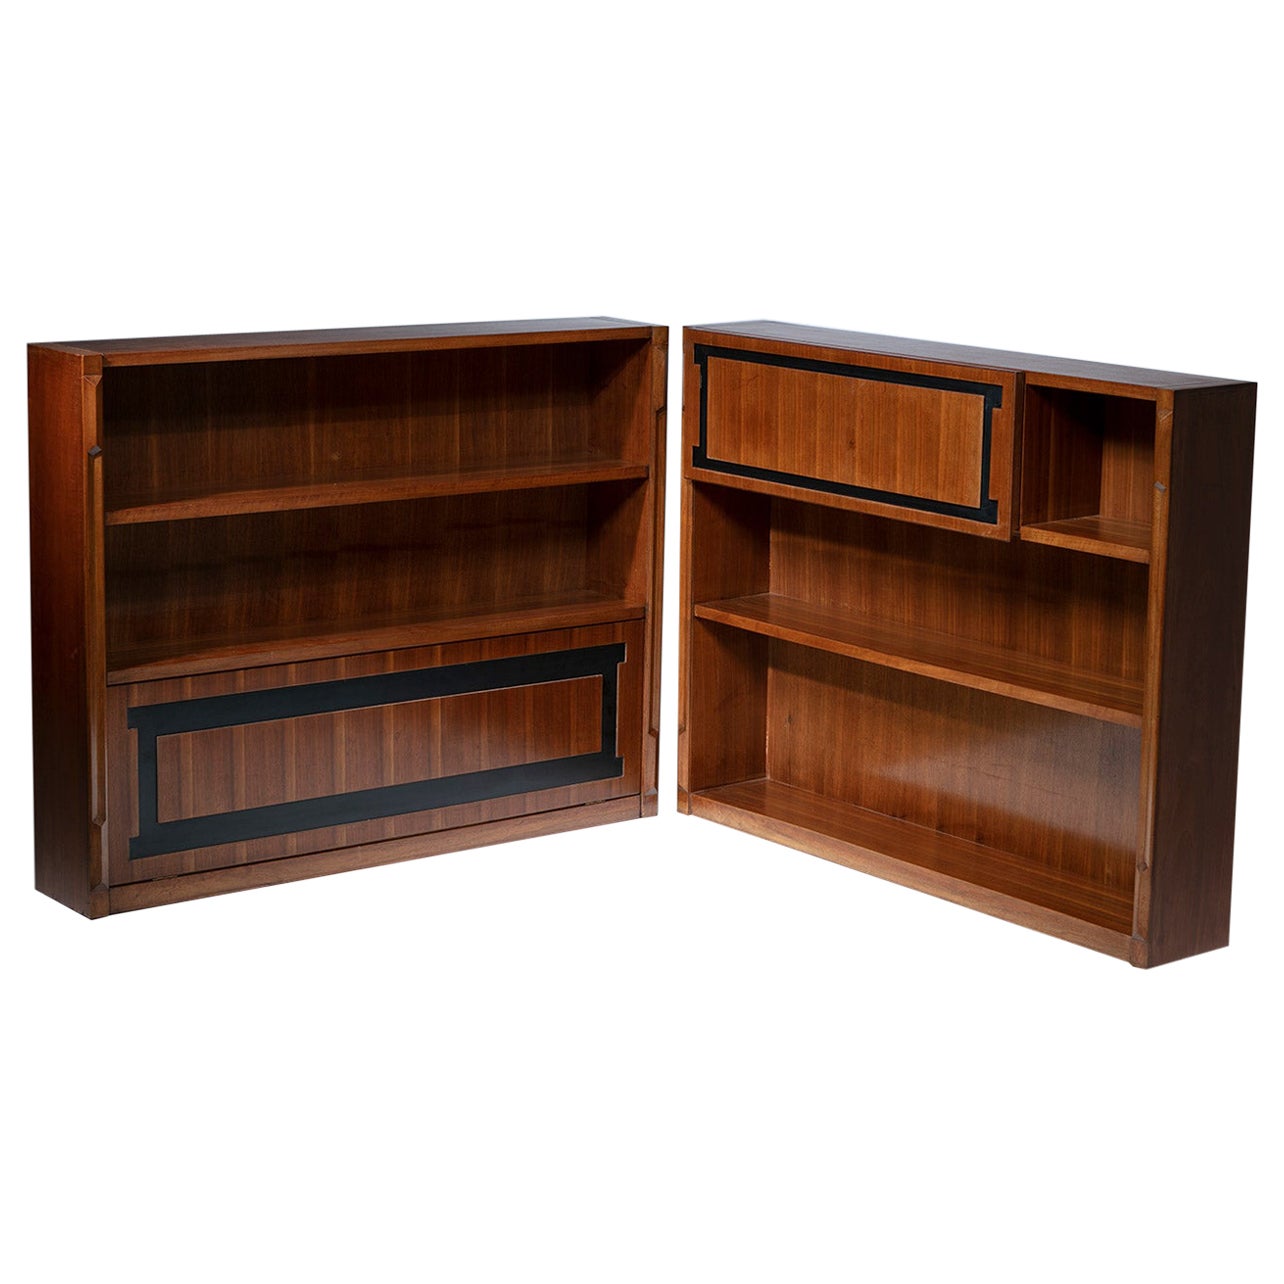 Pair of Walnut Tall Modular Storage Pieces, 1950s, Italy For Sale